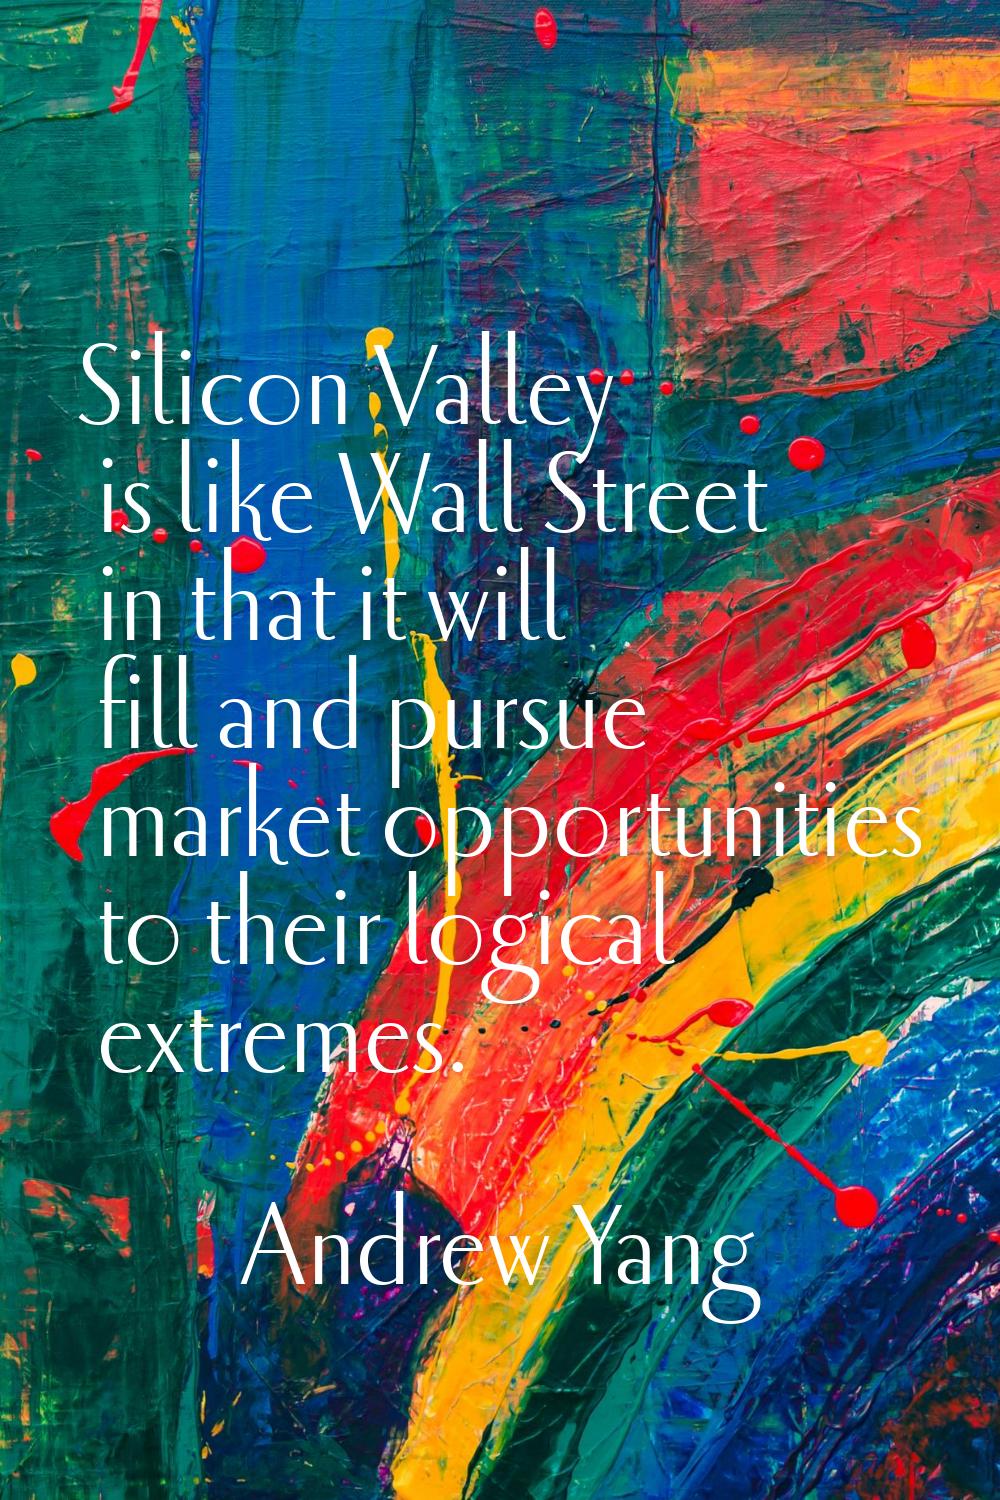 Silicon Valley is like Wall Street in that it will fill and pursue market opportunities to their lo